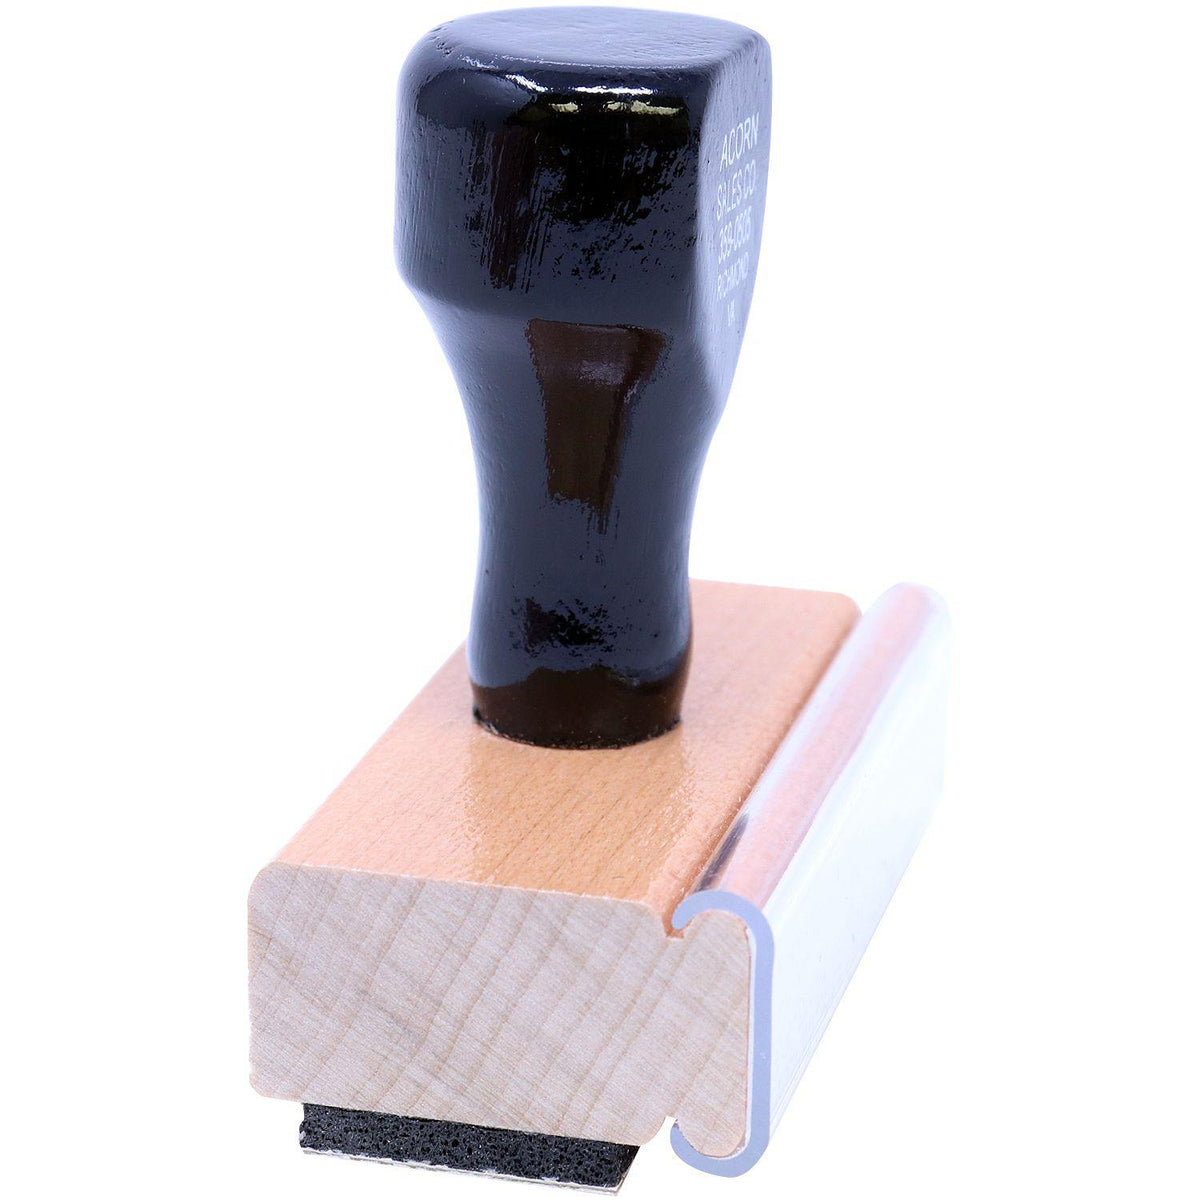 Side View of Large Bold Font File Rubber Stamp at an Angle